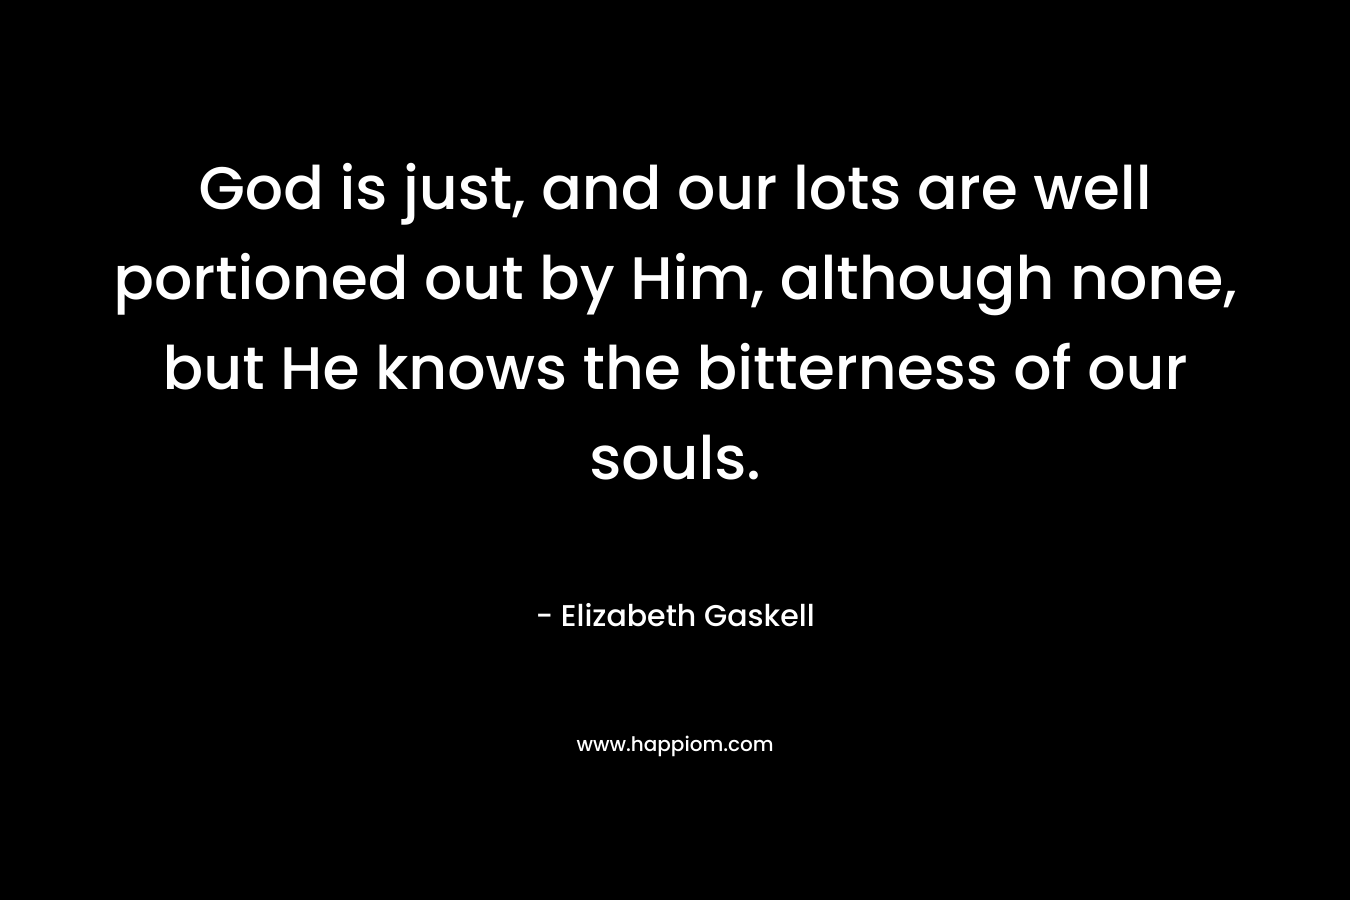 God is just, and our lots are well portioned out by Him, although none, but He knows the bitterness of our souls. – Elizabeth Gaskell